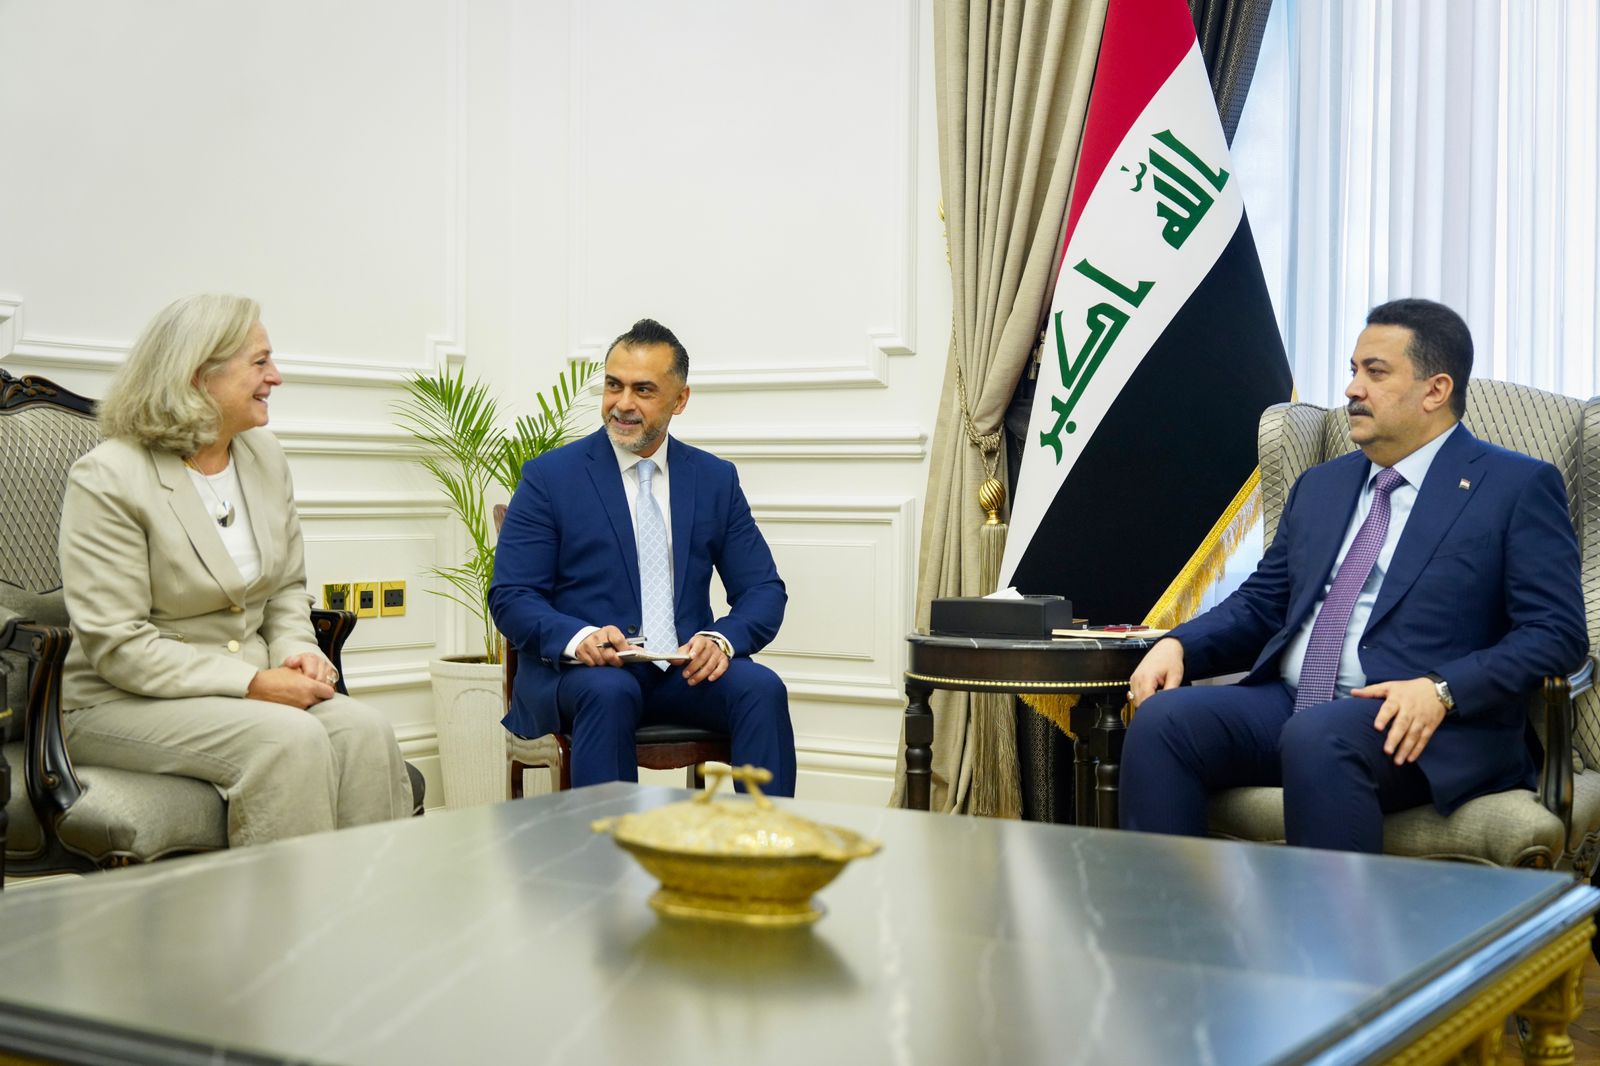 Romanski reveals that 73 million has been provided to the Iraqi government to improve services